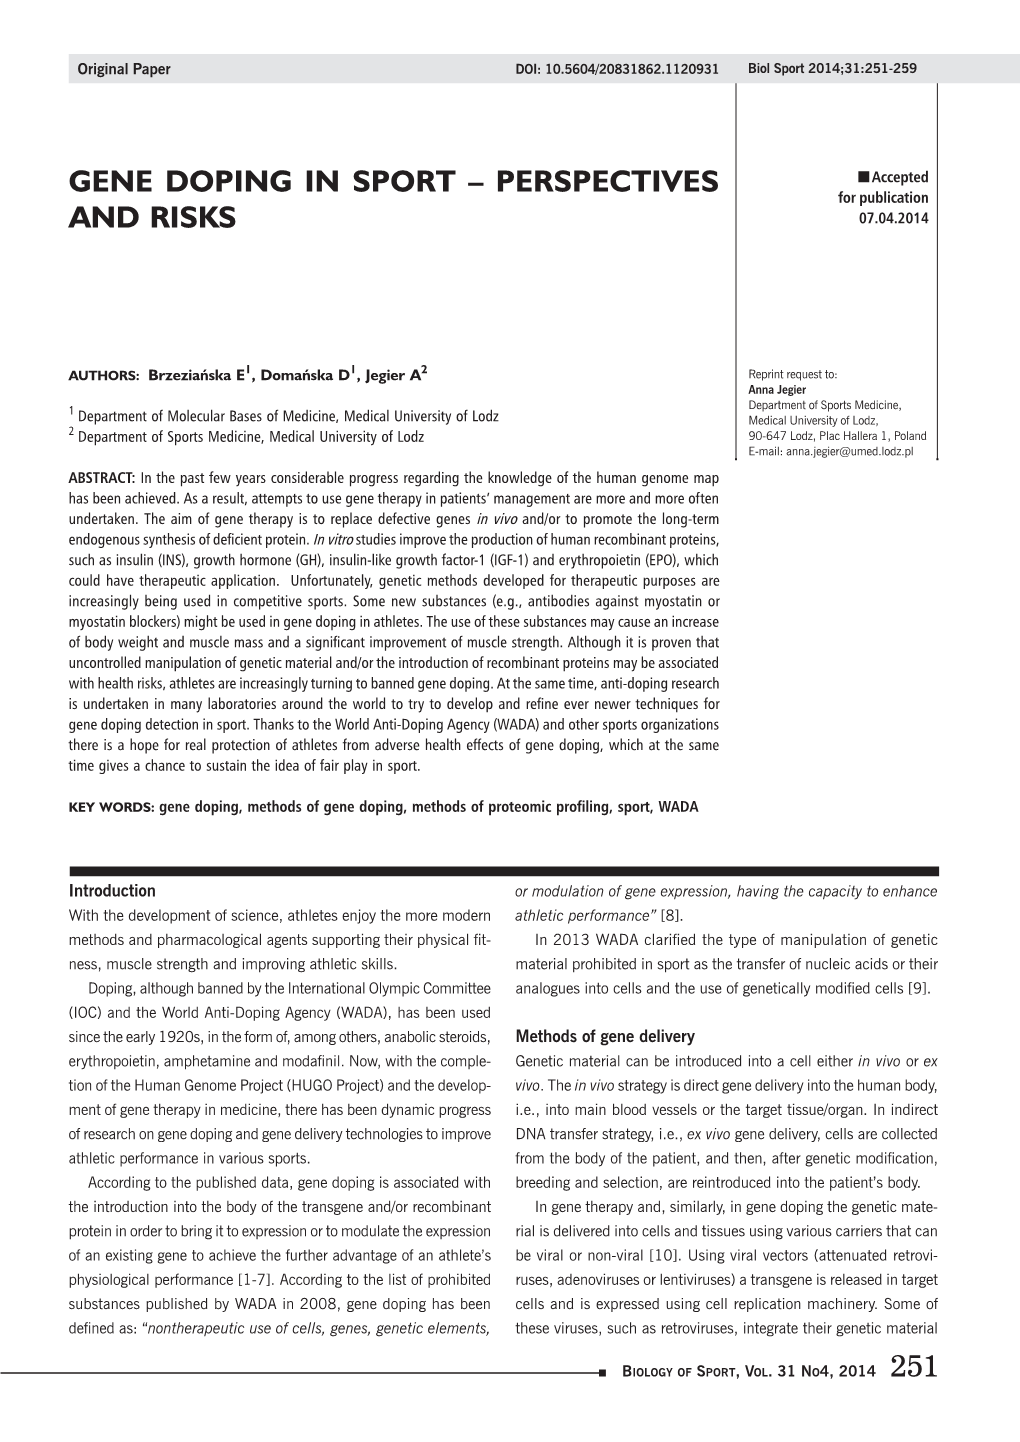 GENE DOPING in SPORT – PERSPECTIVES for Publication and RISKS 07.04.2014